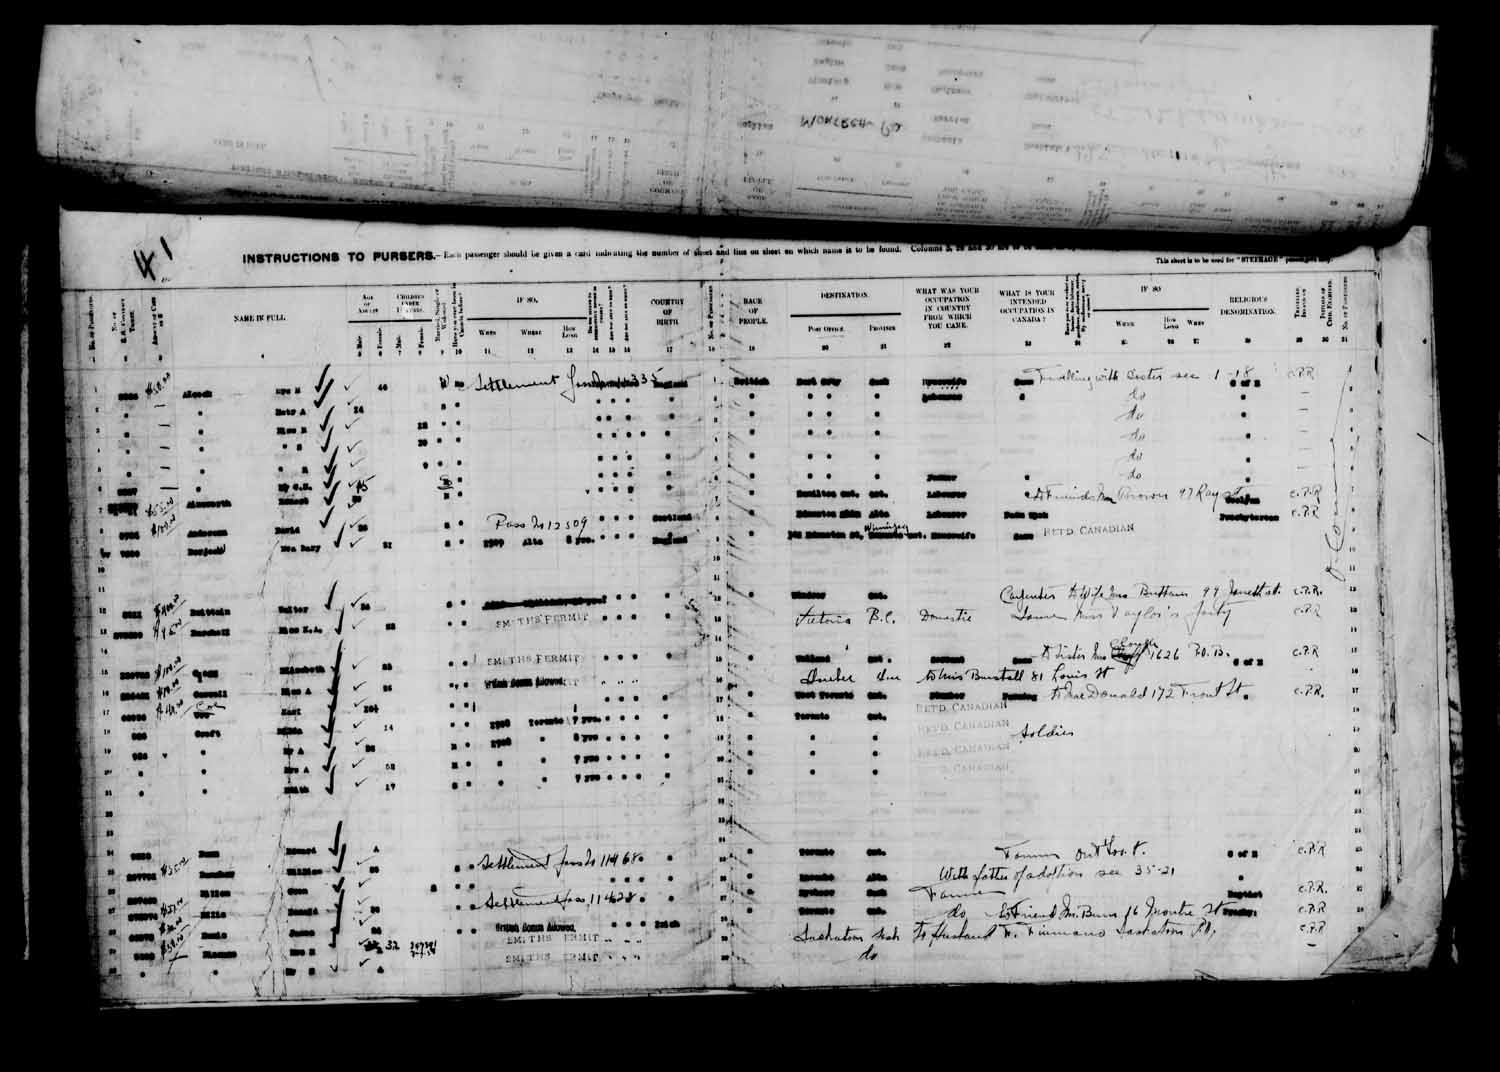 Digitized page of Passenger Lists for Image No.: e003610668